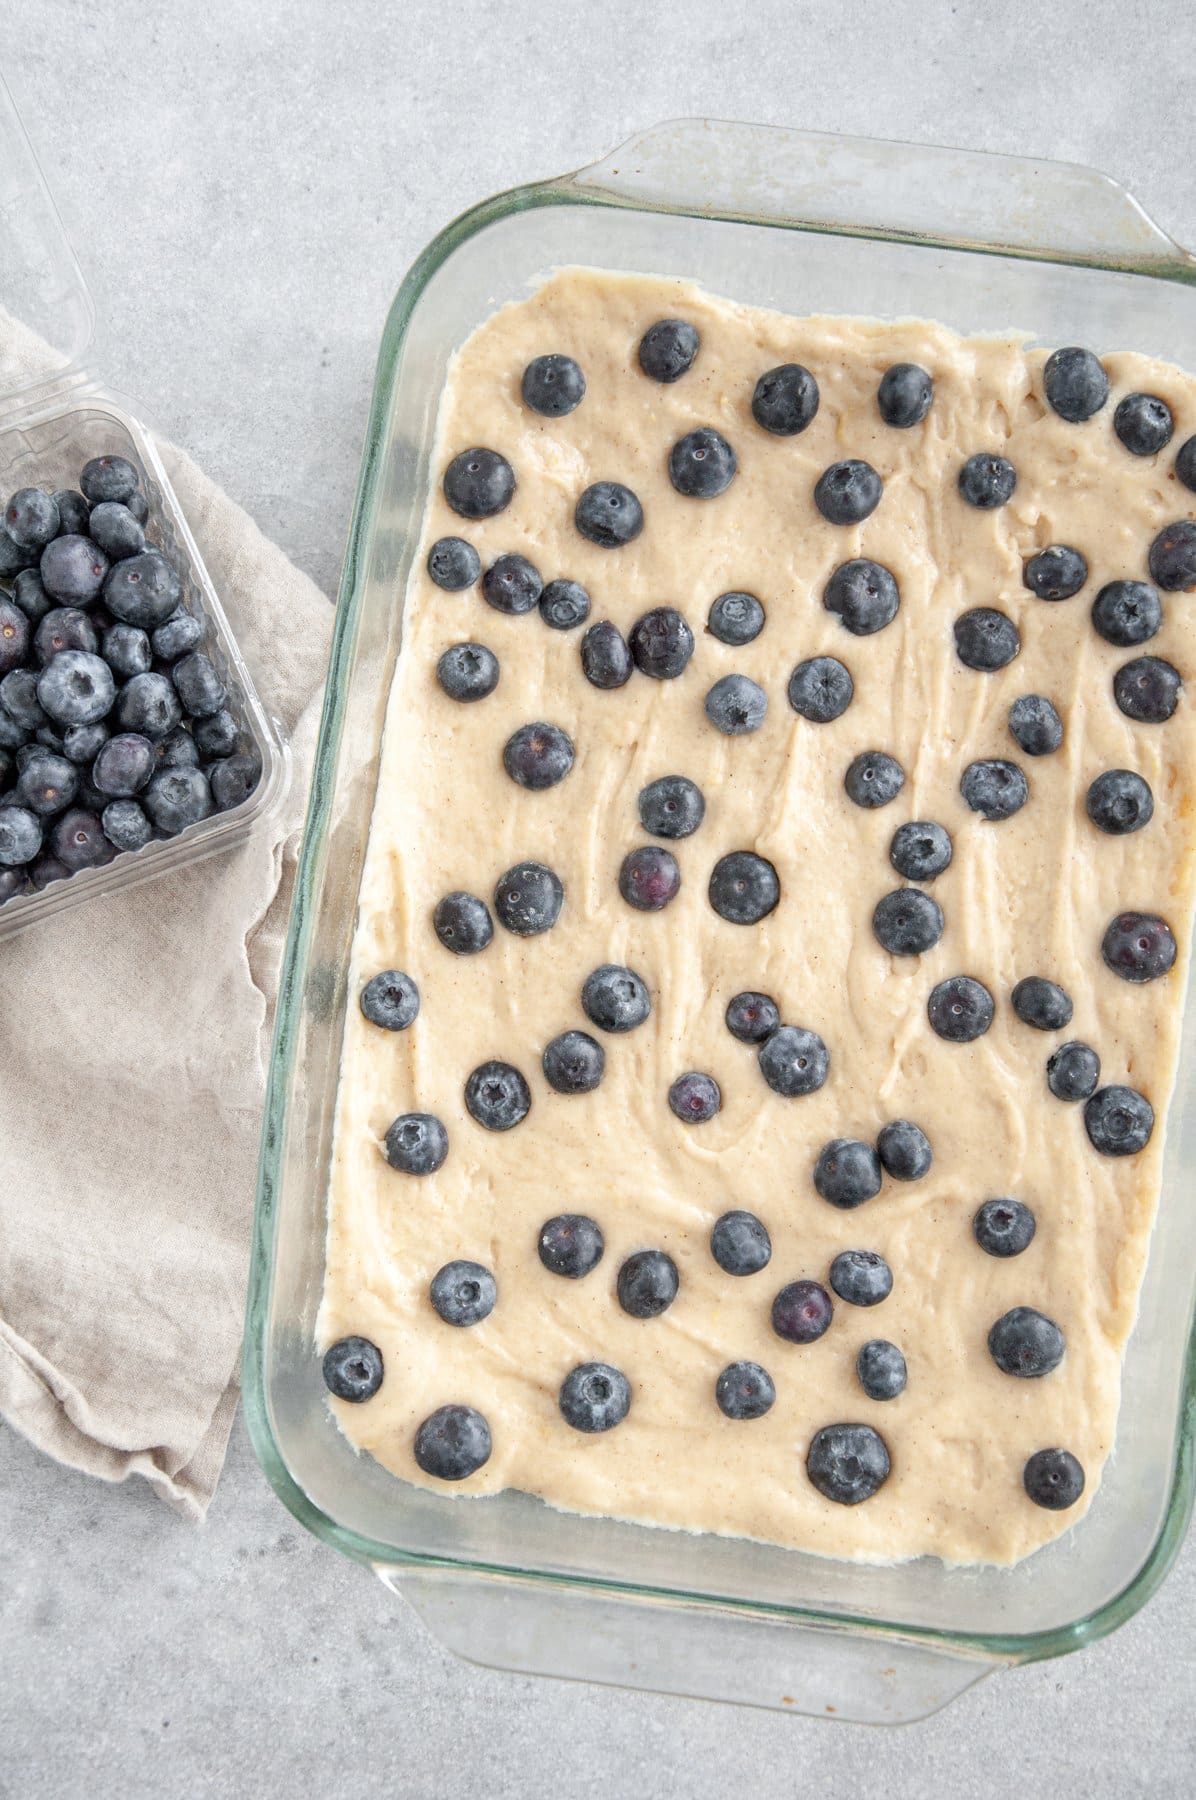 lemon cake batter with blueberries on top of it all in a baking dish